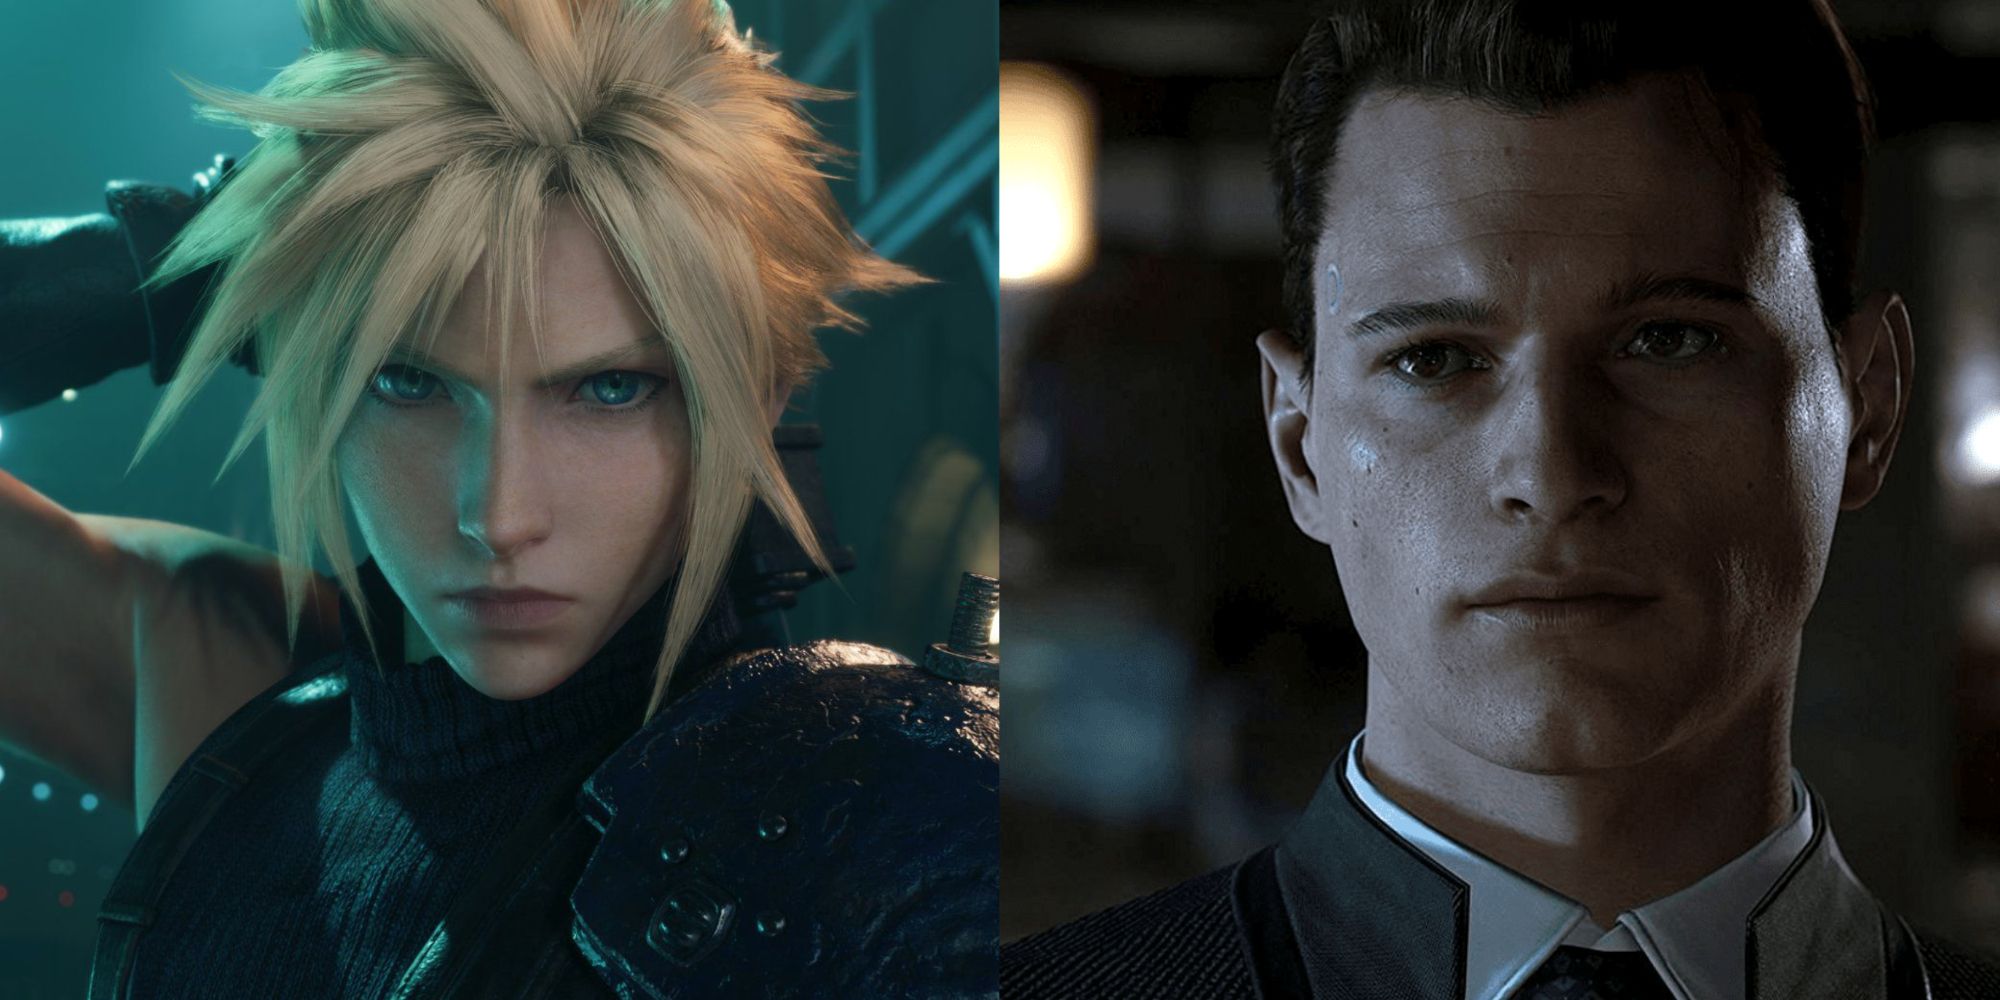 Cloud from FF7 and Connor from Detroit Become Human